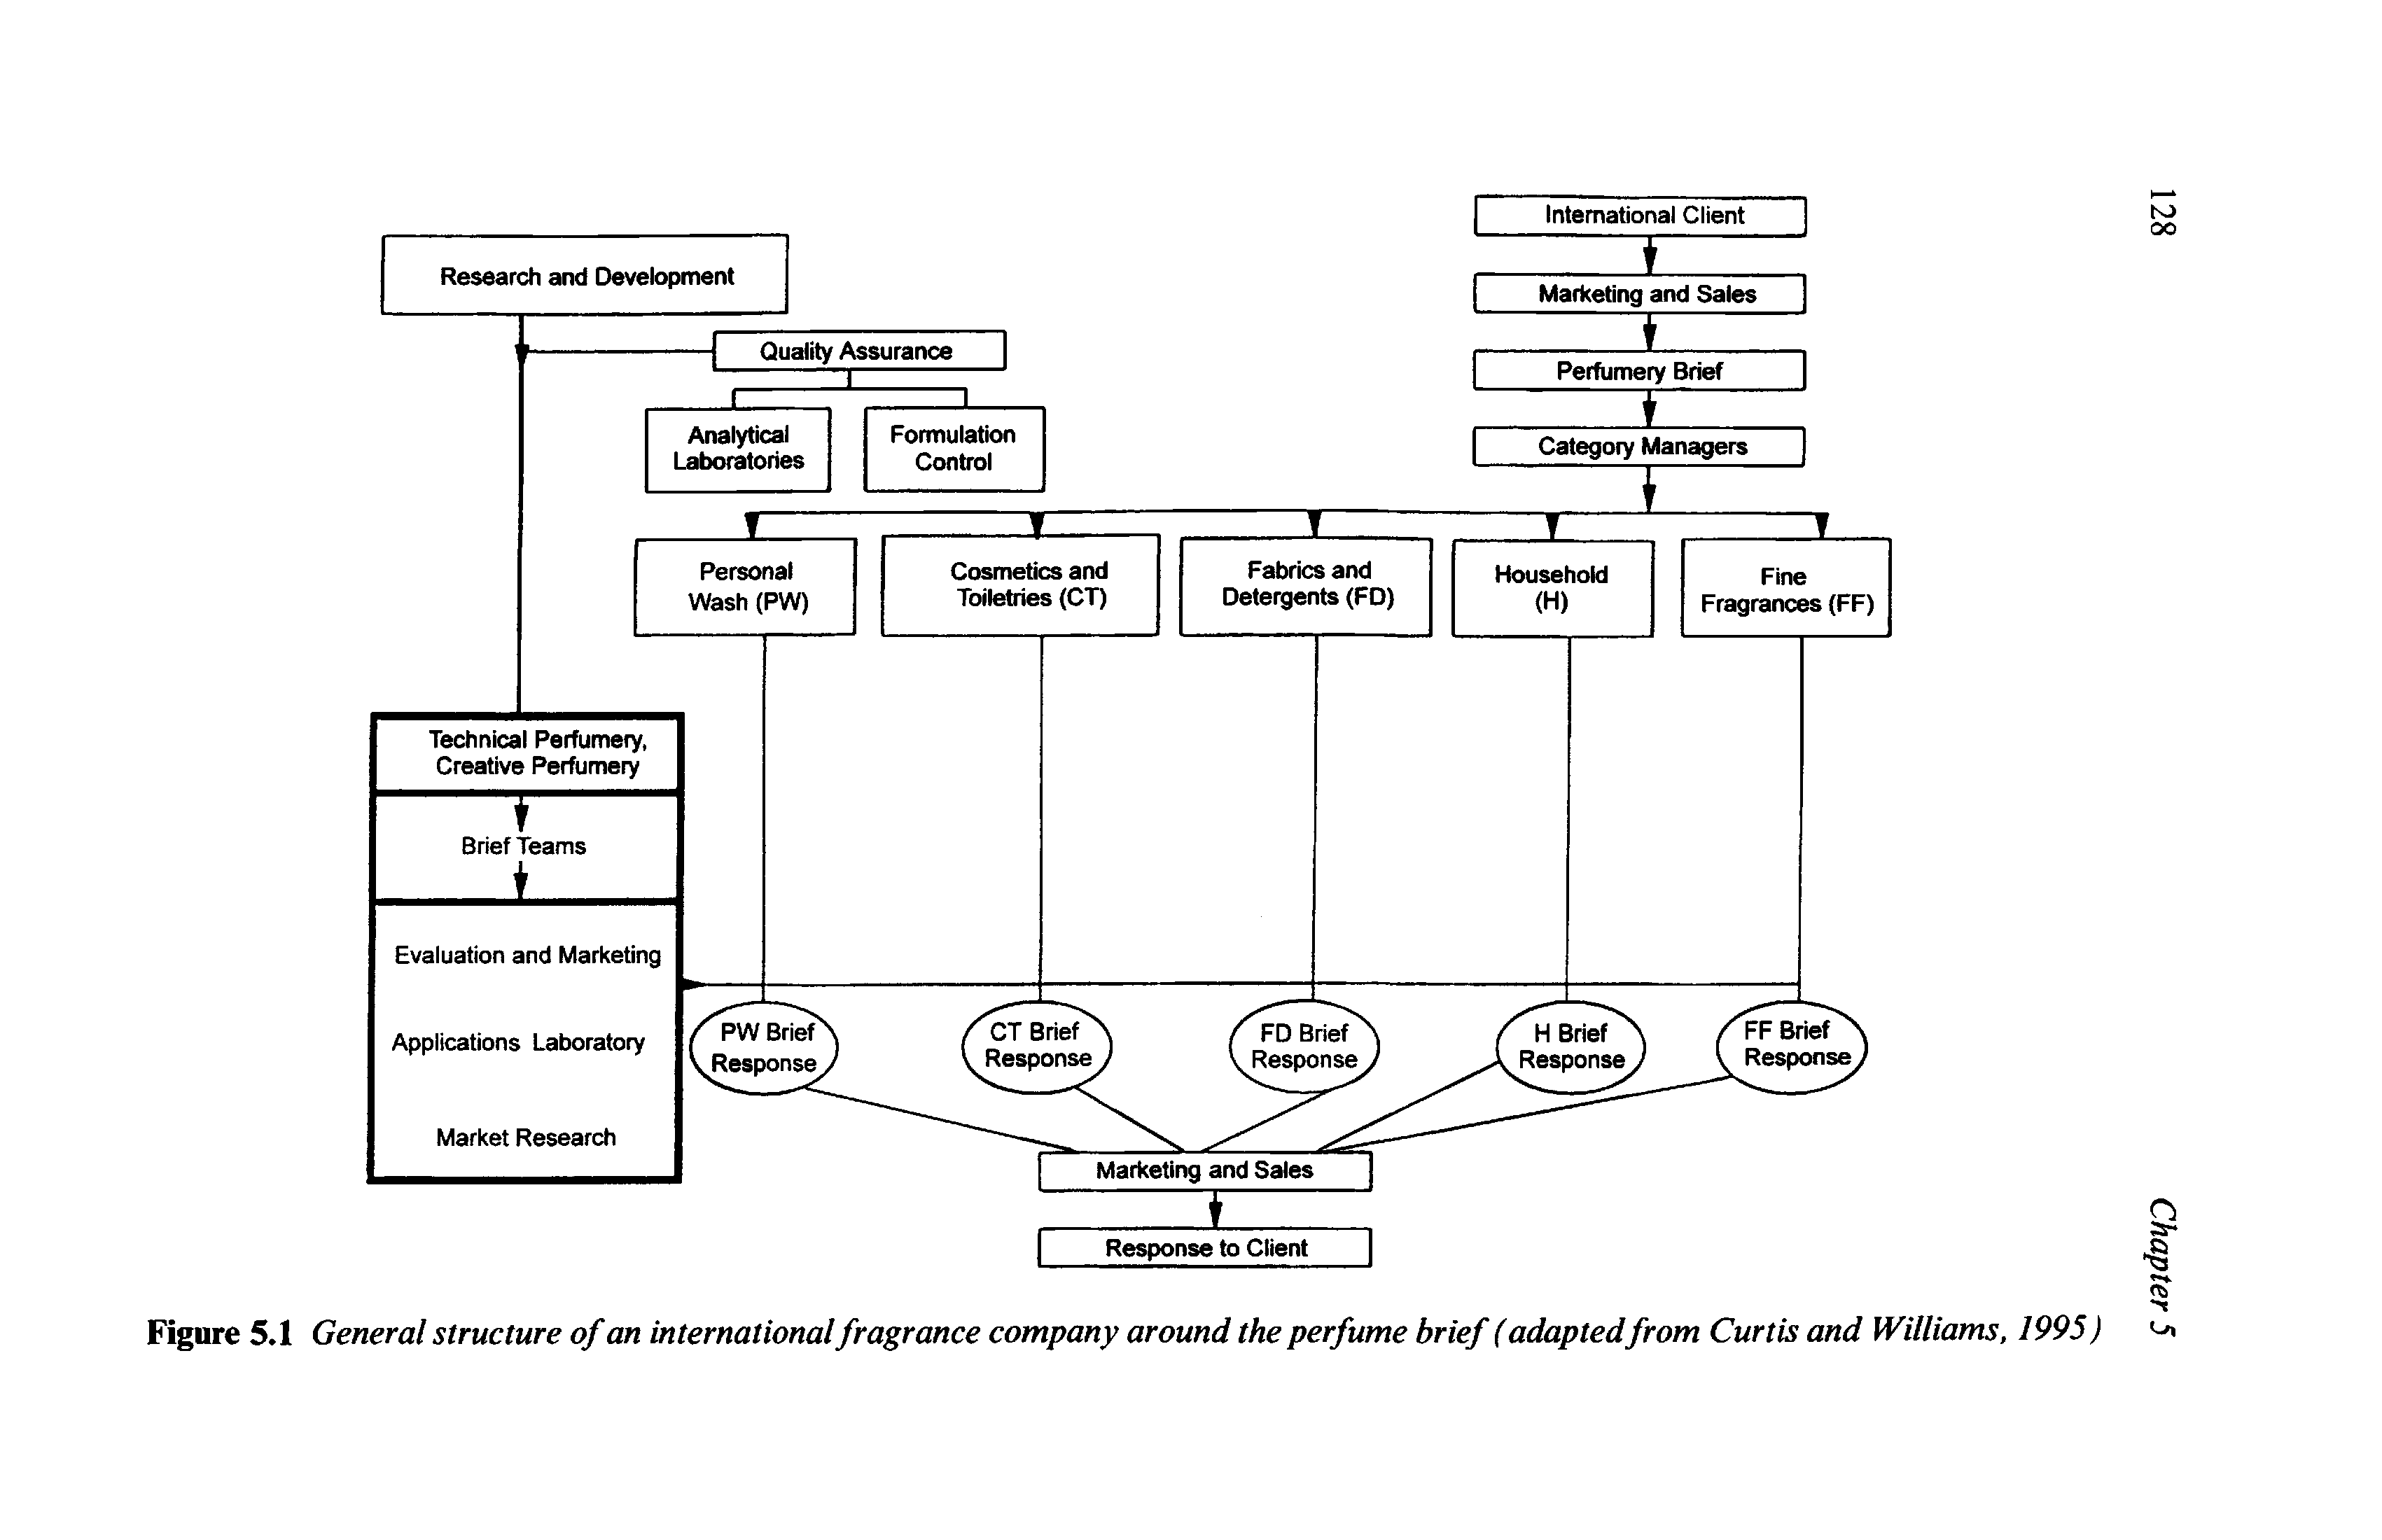 Figure 5.1 General structure of an international fragrance company around the perfume brief (adaptedfrom Curtis and Williams, 1995)...